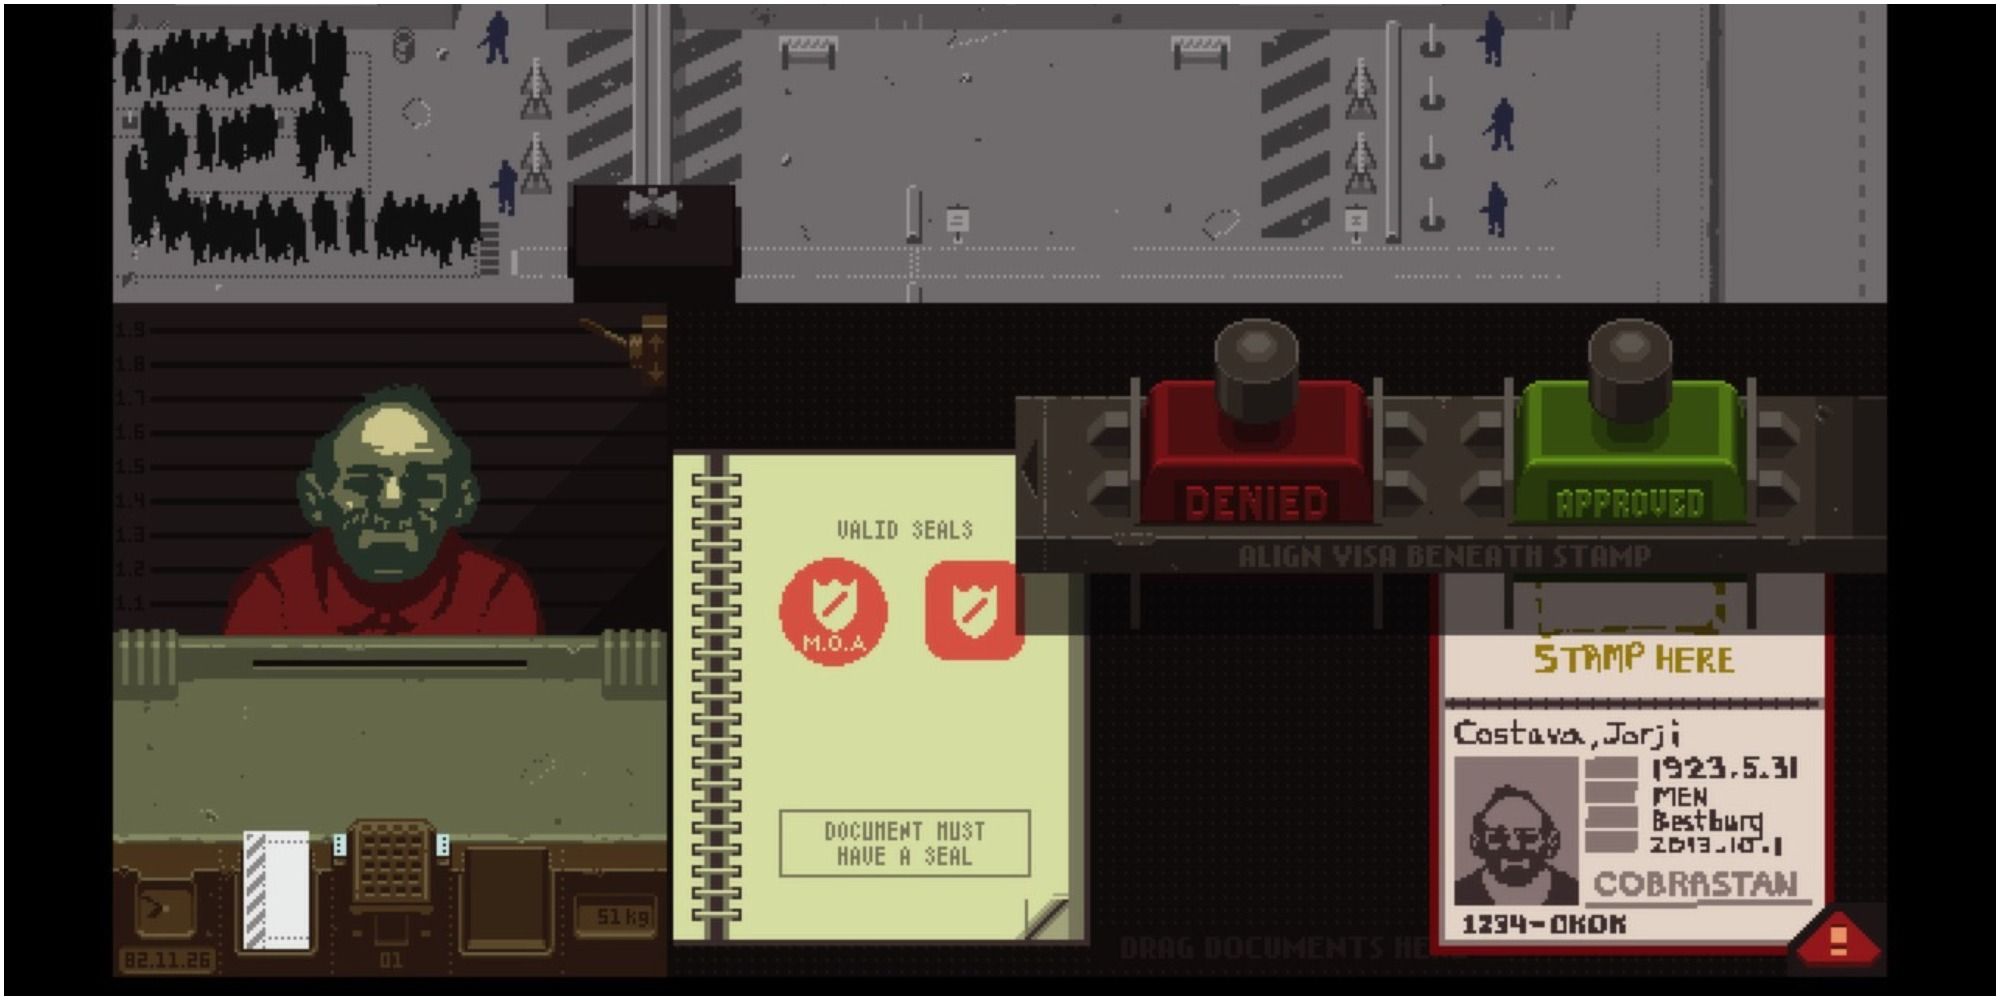 A man presents hit documentation at the border in Papers, Please